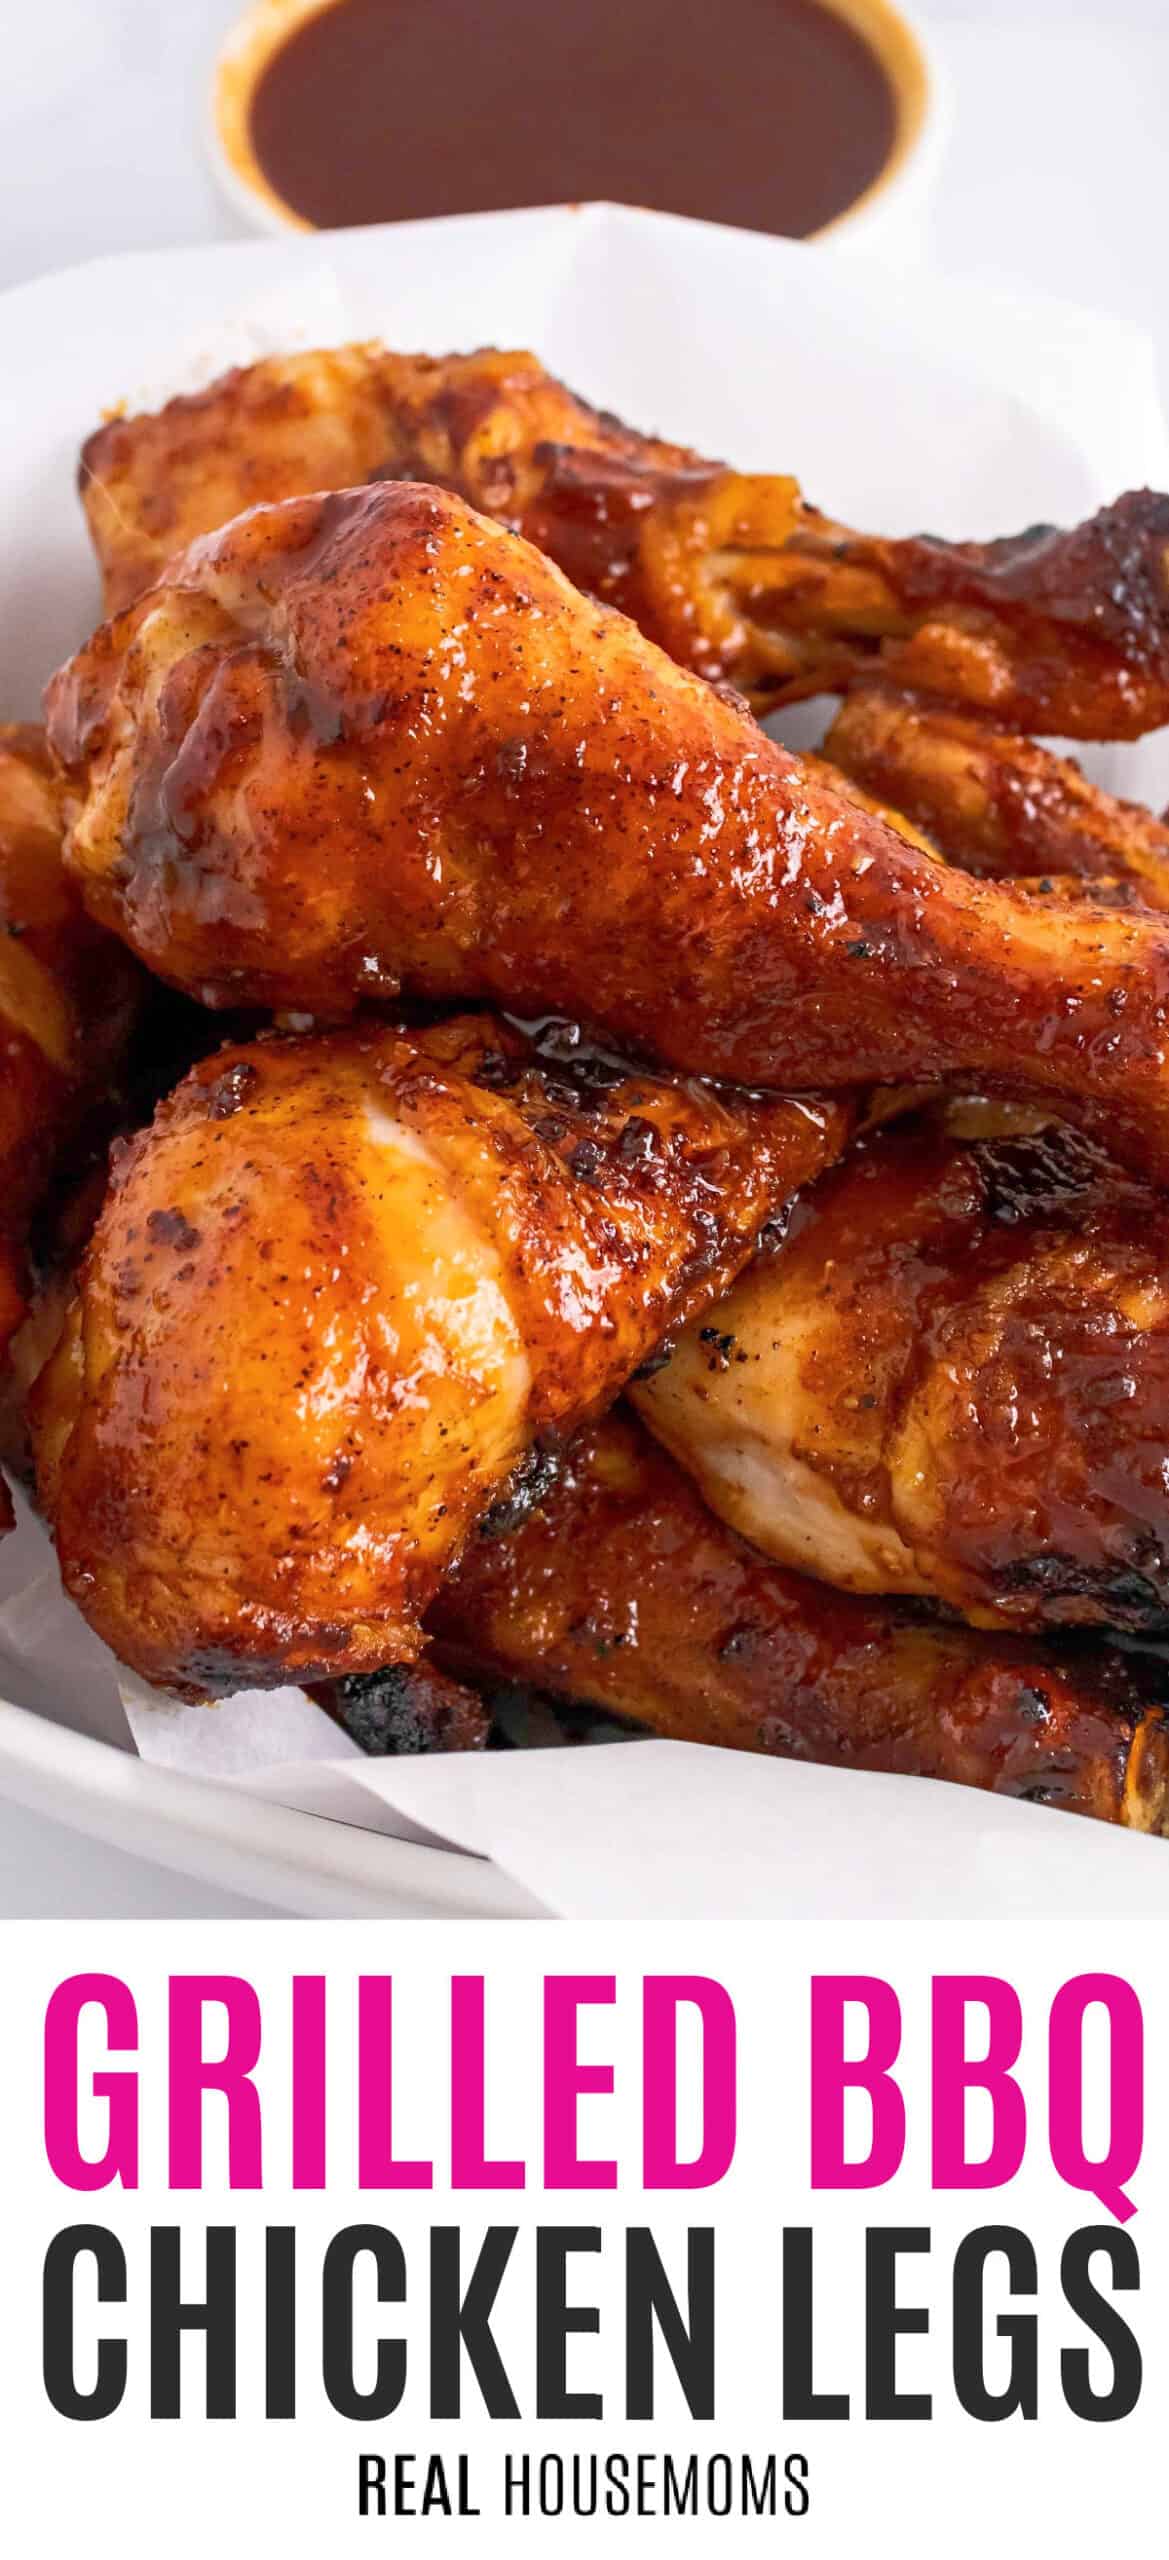 Grilled BBQ Chicken Legs - Real Housemoms